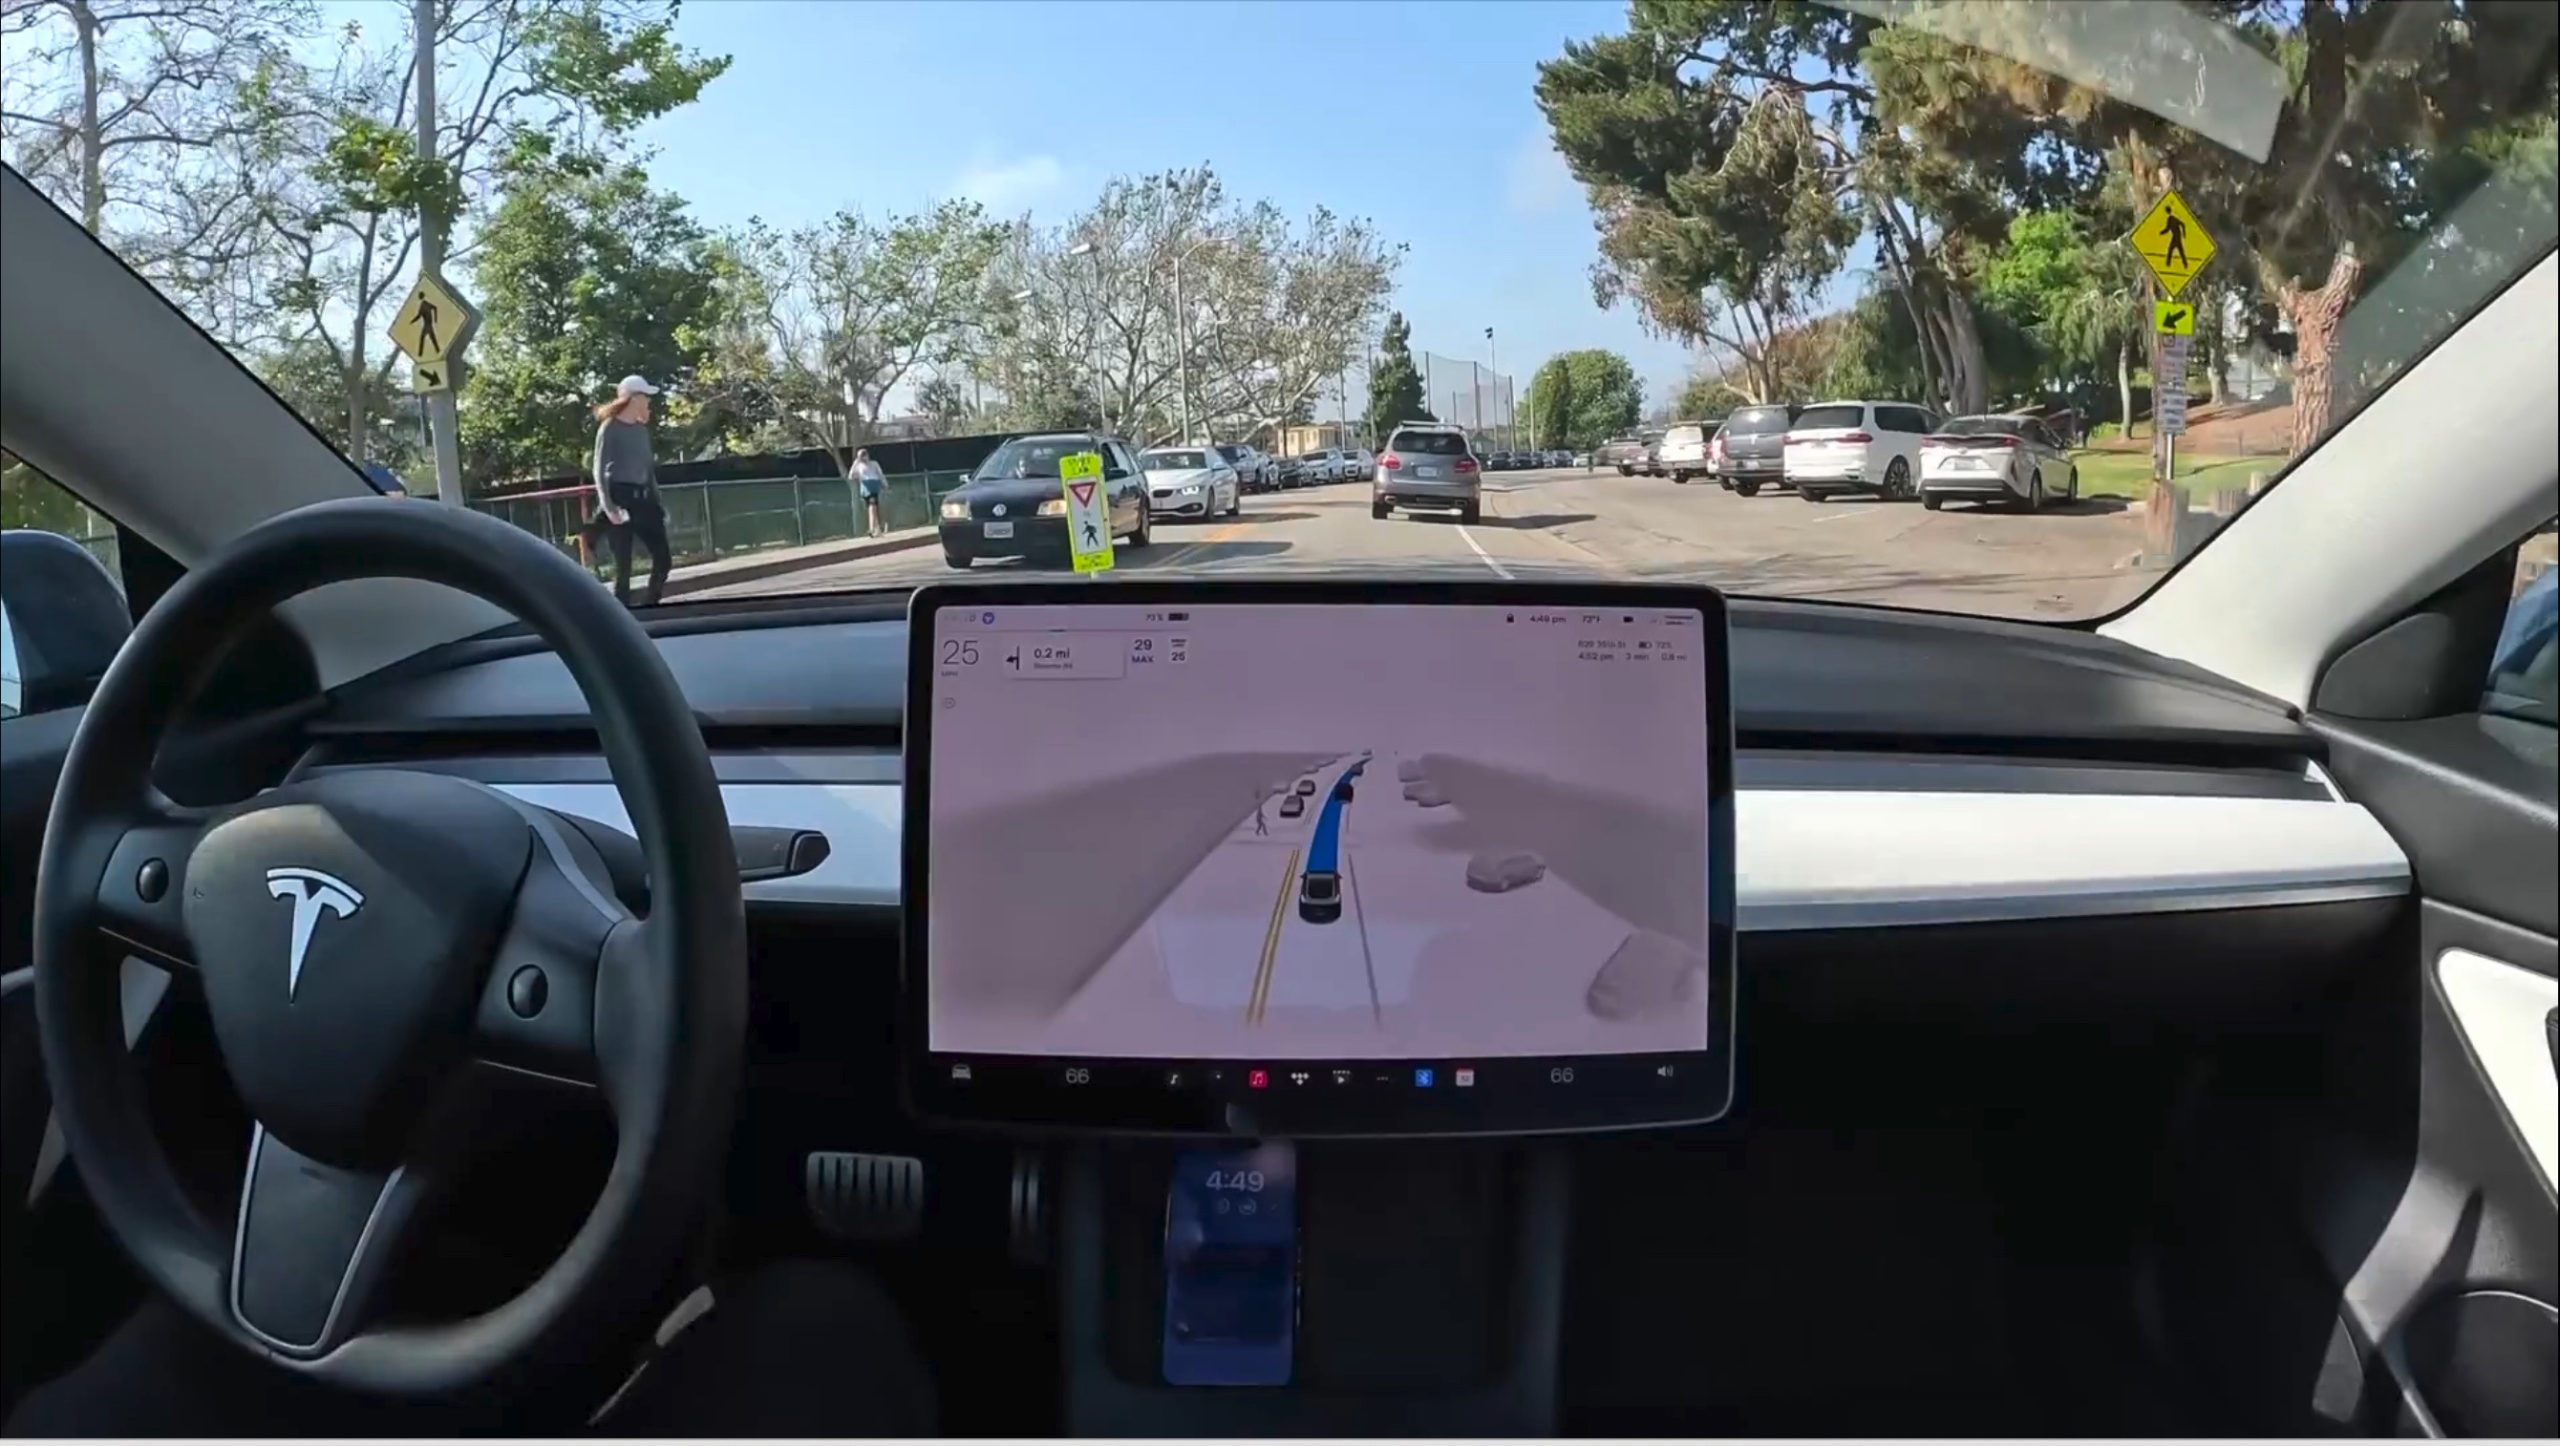 A Tesla in Self-Driving Mode Sees a Crosswalk, But Decides Not to Stop

